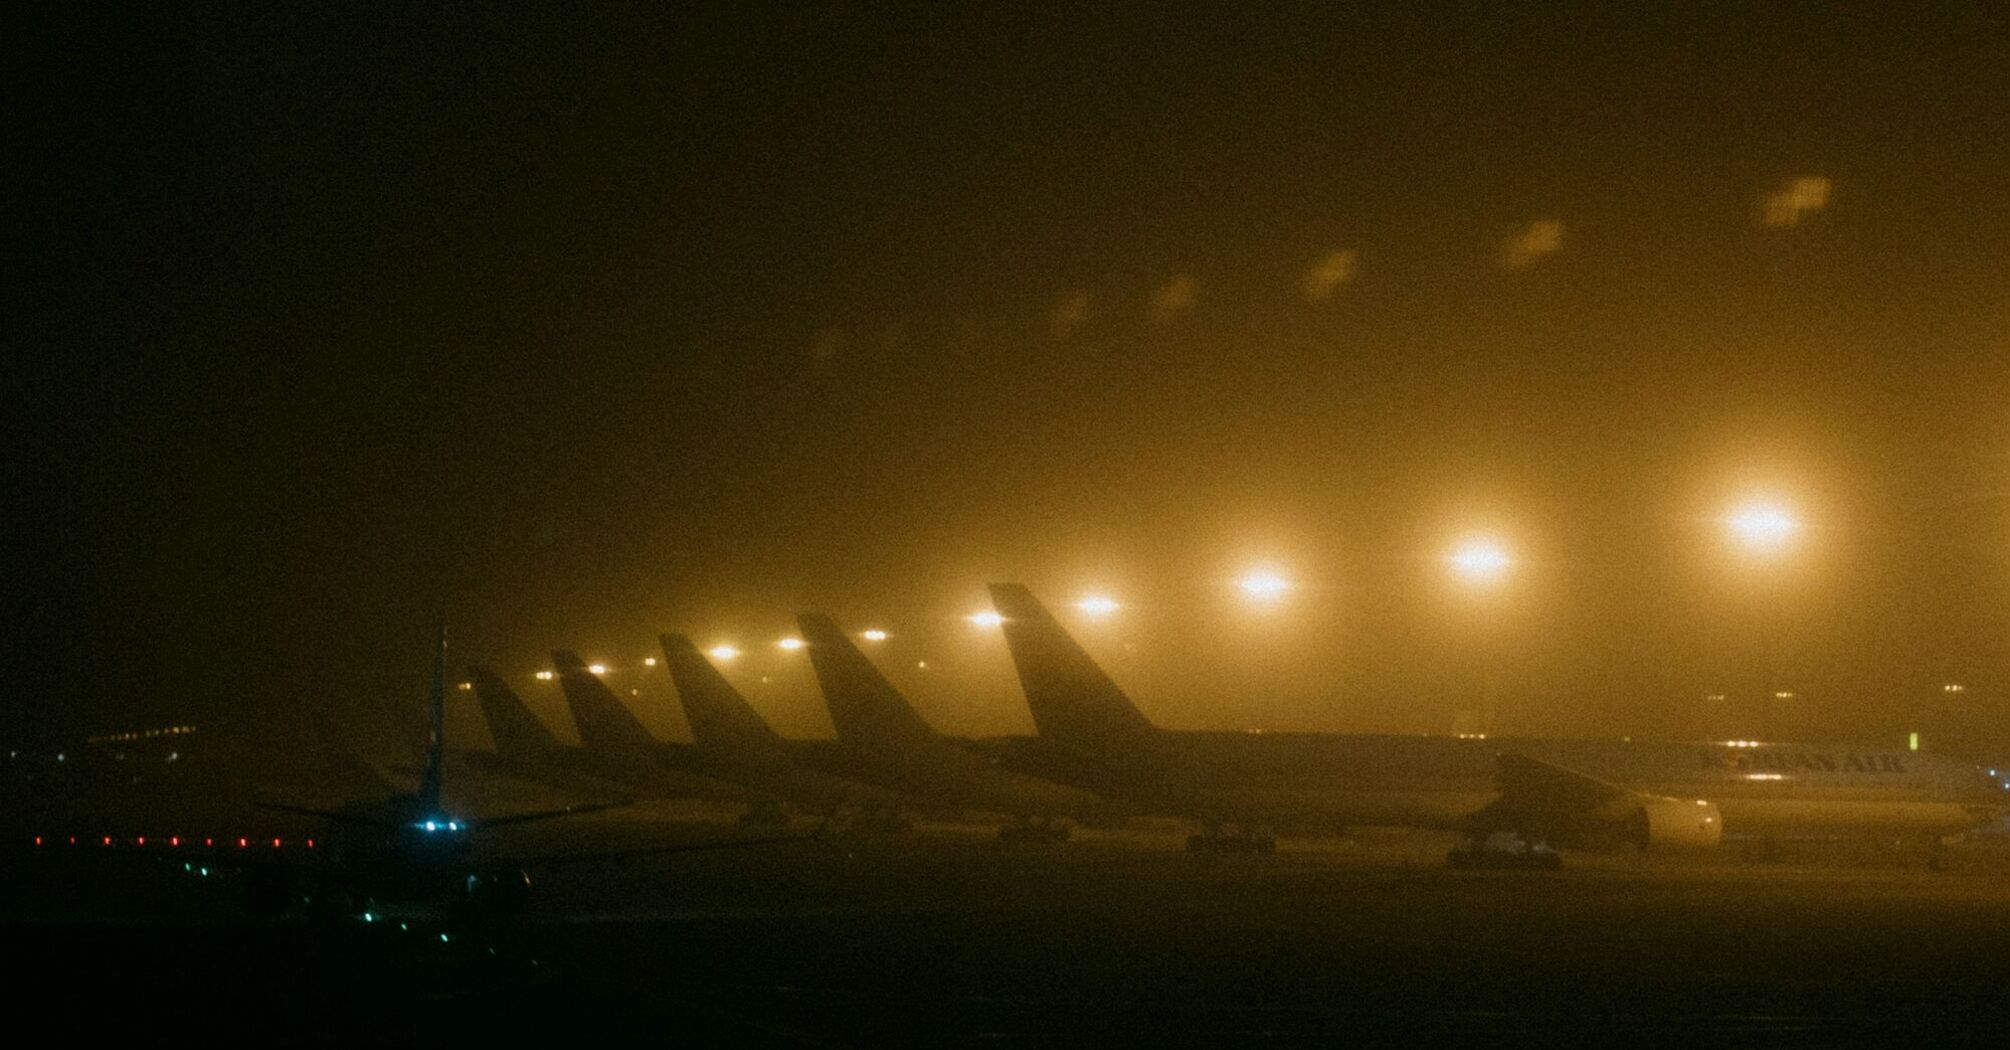 A foggy night at the Seoul Incheon Airport